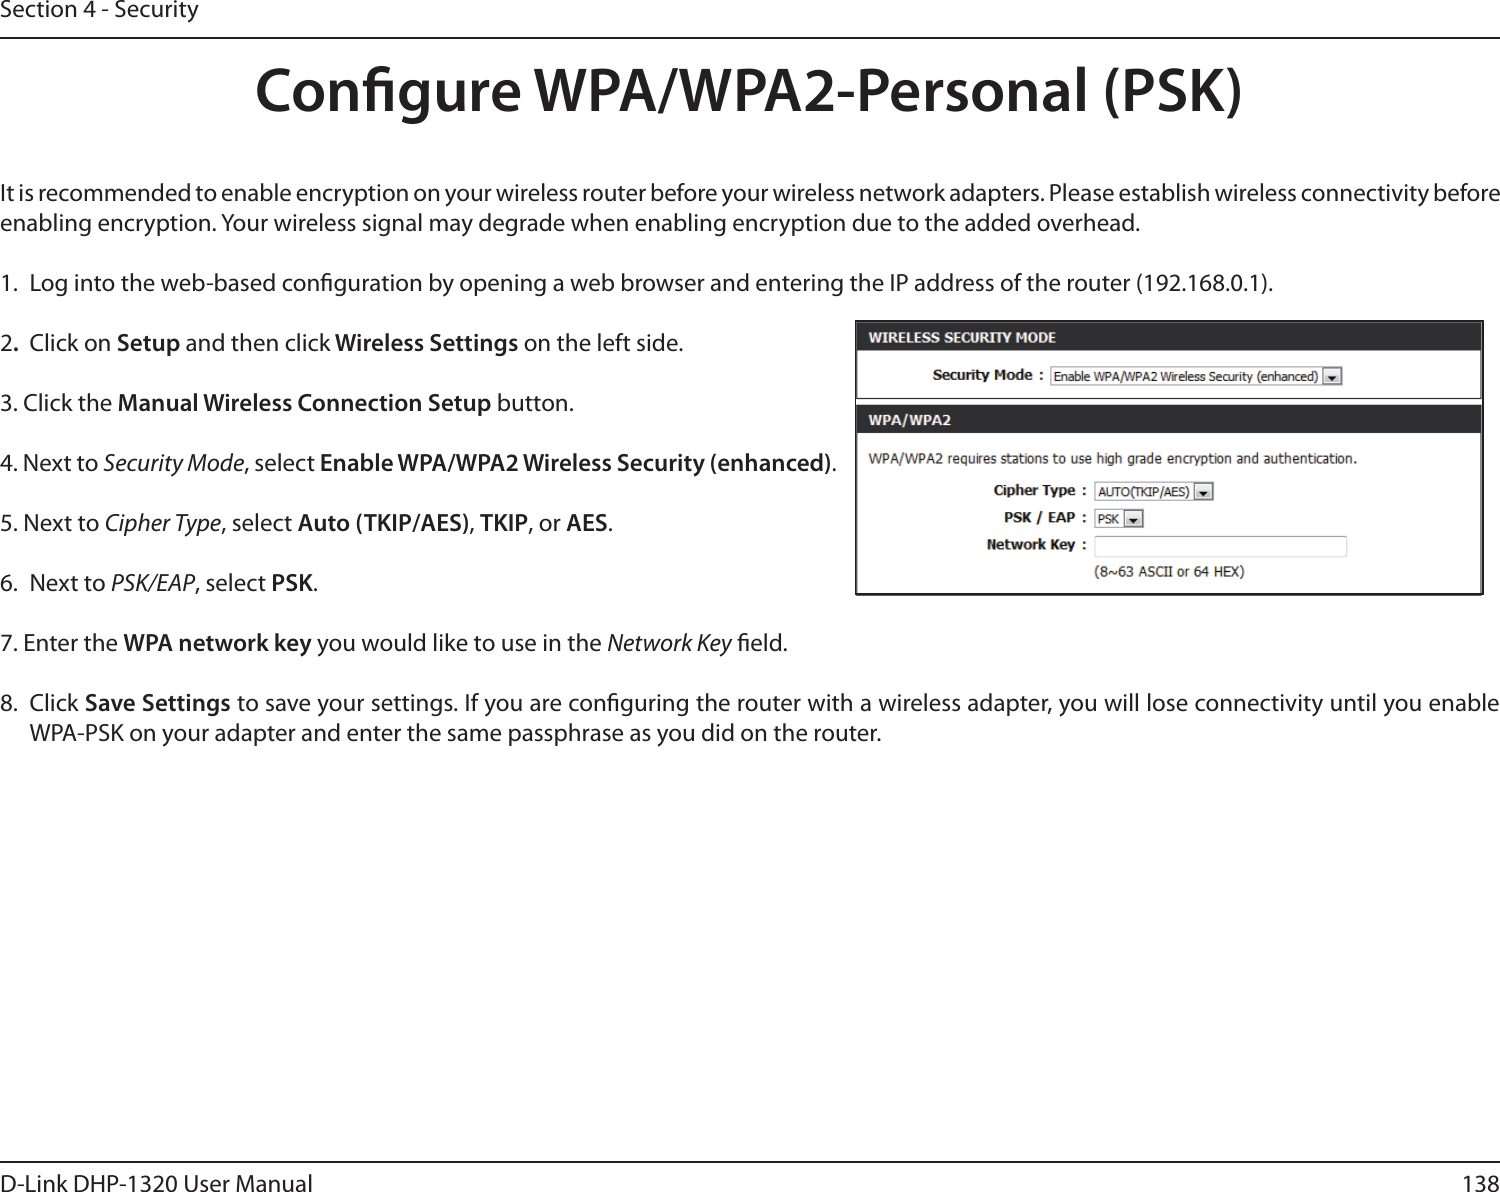 138D-Link DHP-1320 User ManualSection 4 - SecurityCongure WPA/WPA2-Personal (PSK)It is recommended to enable encryption on your wireless router before your wireless network adapters. Please establish wireless connectivity before enabling encryption. Your wireless signal may degrade when enabling encryption due to the added overhead.1. Log into the web-based conguration by opening a web browser and entering the IP address of the router (192.168.0.1).  2.  Click on Setup and then click Wireless Settings on the left side.3. Click the Manual Wireless Connection Setup button. 4. Next to Security Mode, select Enable WPA/WPA2 Wireless Security (enhanced).5. Next to Cipher Type, select Auto (TKIP/AES), TKIP, or AES.6.  Next to PSK/EAP, select PSK.7. Enter the WPA network key you would like to use in the Network Key eld.8.  Click Save Settings to save your settings. If you are conguring the router with a wireless adapter, you will lose connectivity until you enable WPA-PSK on your adapter and enter the same passphrase as you did on the router.